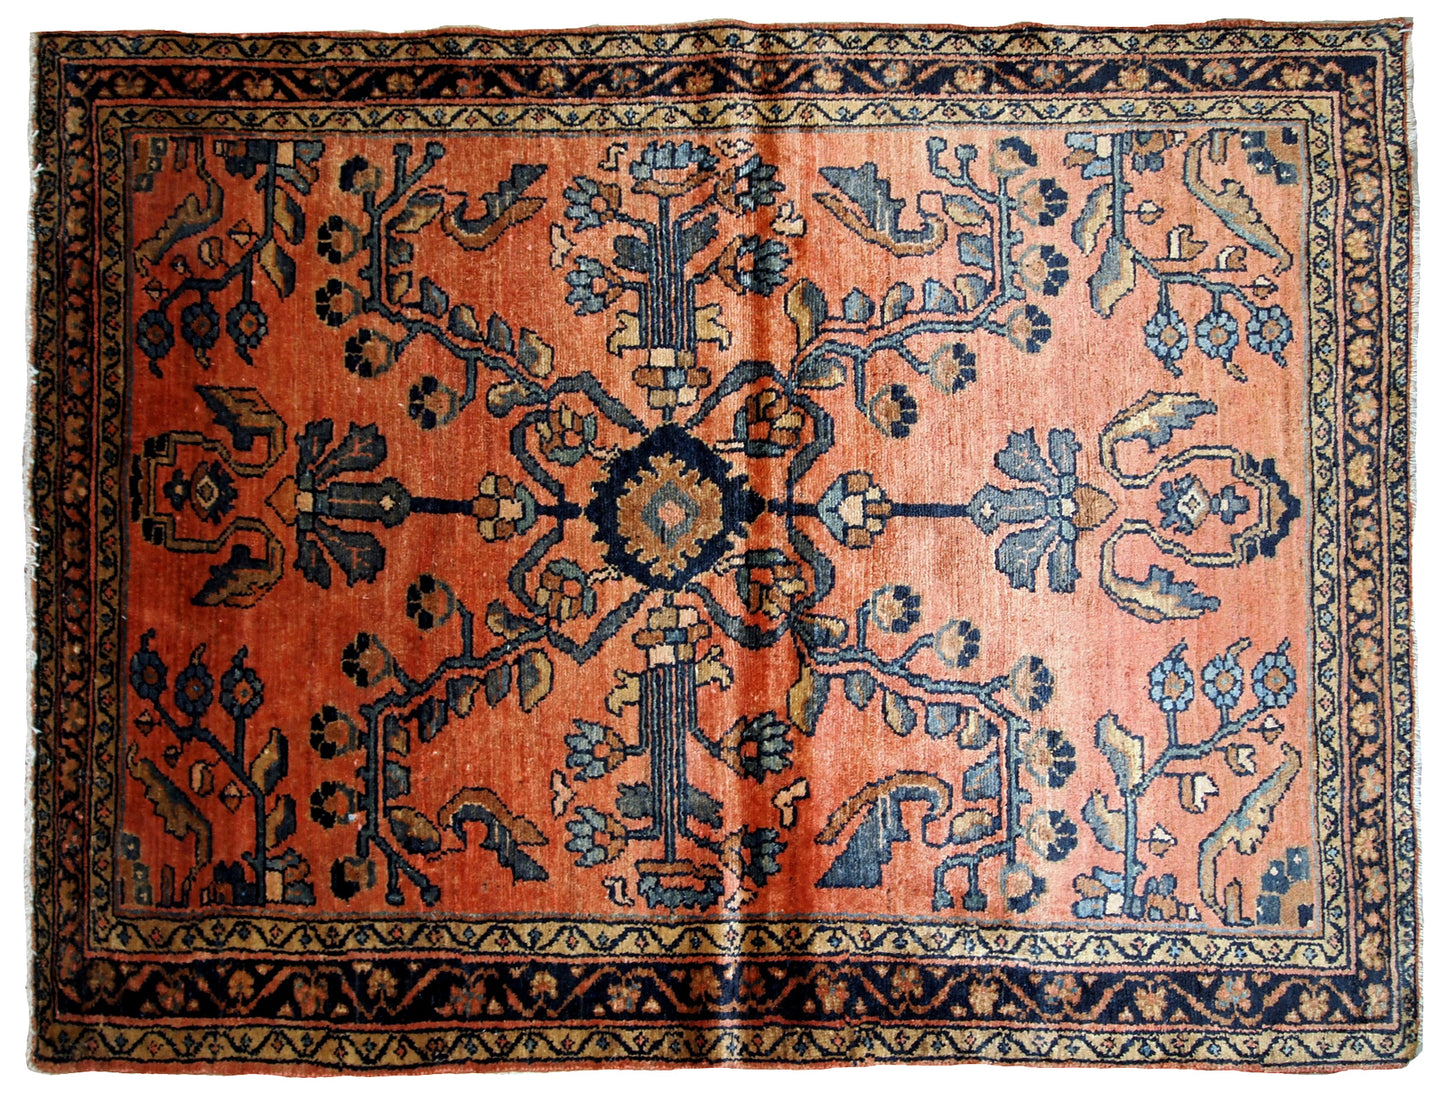 Antique hand made Lilihan rug in red shade with geometric/floral design. The rug is in original good condition from 1920s.